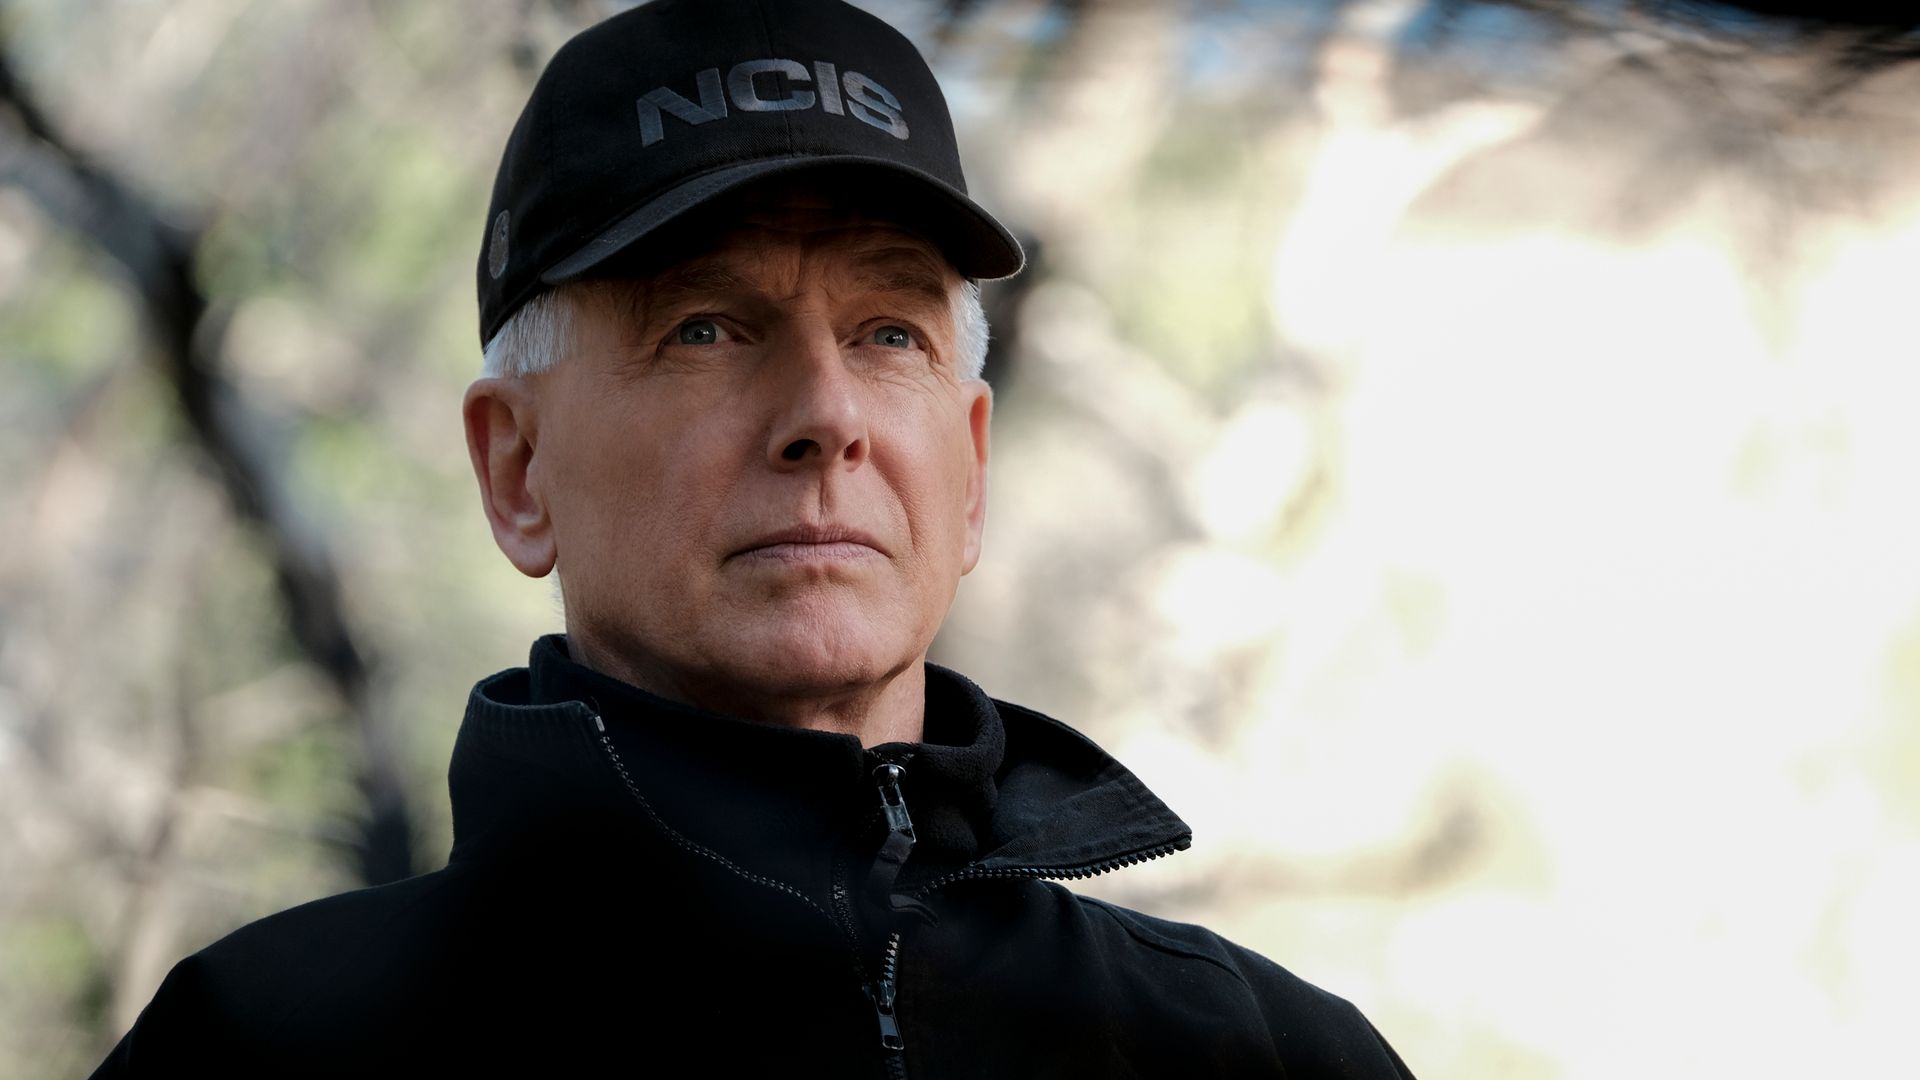 "Lonely Hearts" -- The lead suspect in an NCIS murder investigation is a woman Gibbs' friend, Phillip Brooks (Don Lake), met on a dating site. Also, Sloane has a secret admirer on Valentine's Day, on NCIS, Tuesday, Feb. 11 on the CBS Television Network.  Pictured:  Mark Harmon as NCIS Special Agent Leroy Jethro Gibbs.